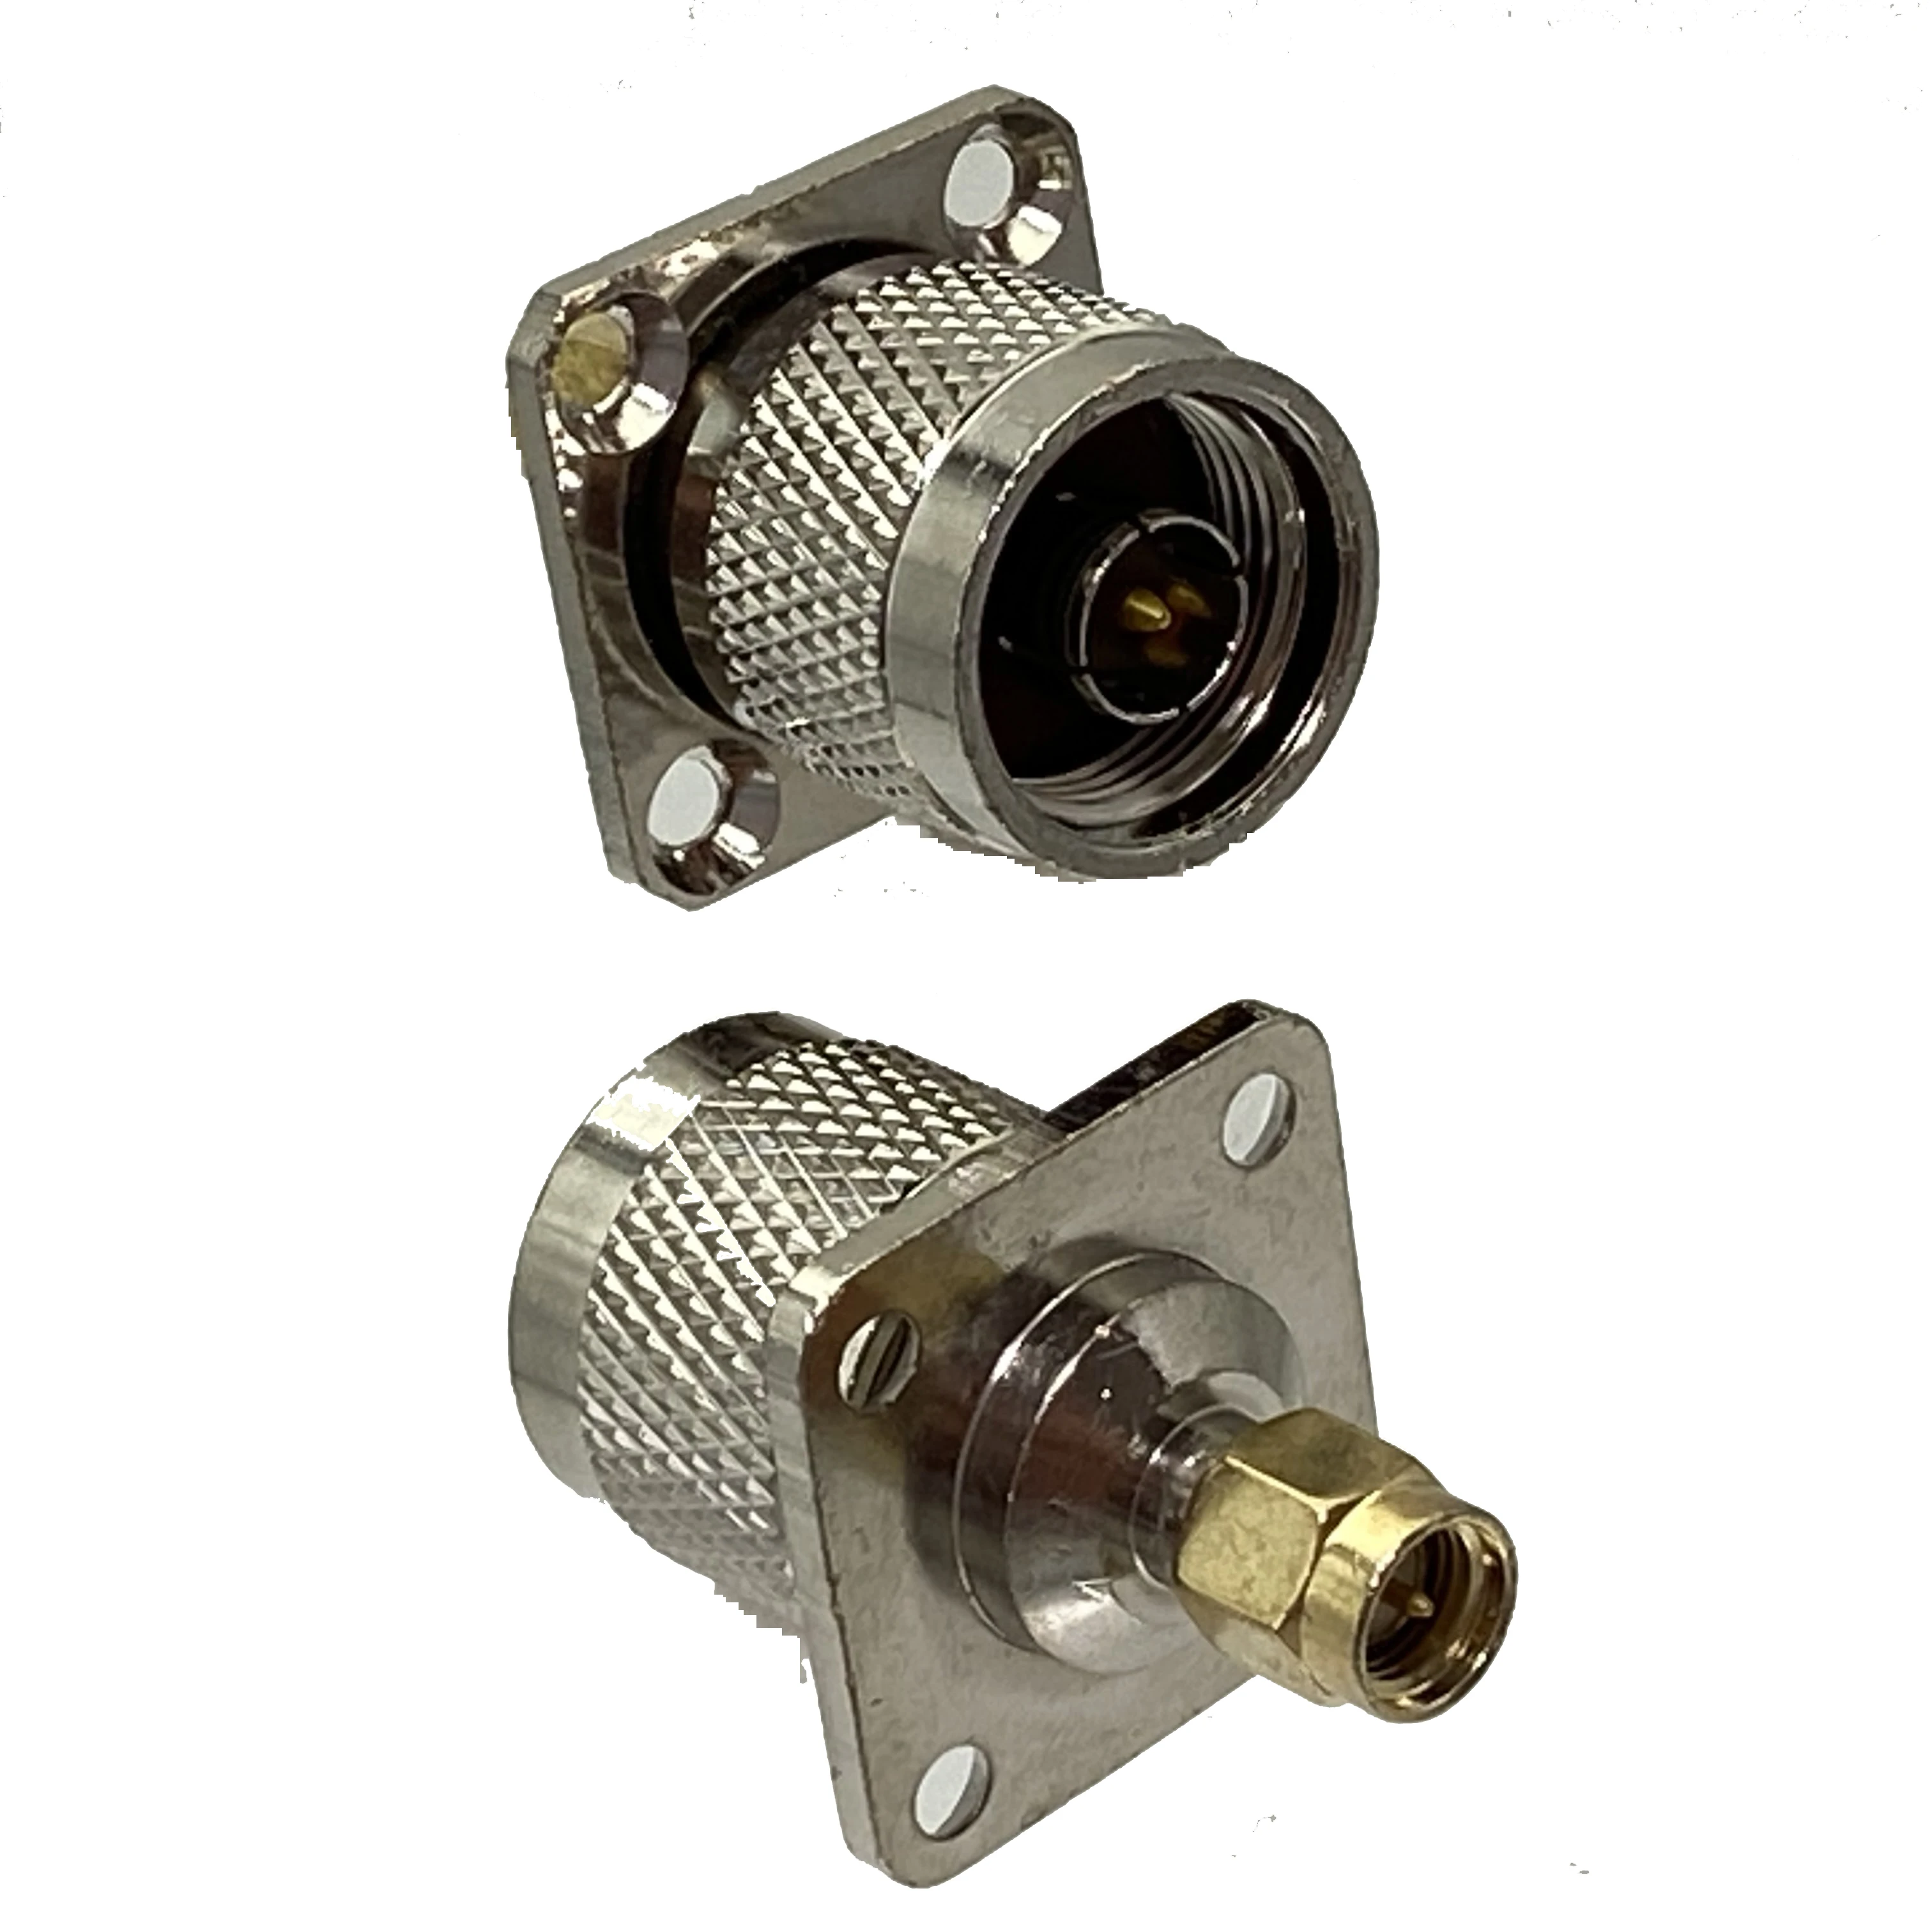 

1pcs Connector Adapter N Male Plug to SMA Male 4-Holes Flange Wire Terminal RF Coaxial Converter